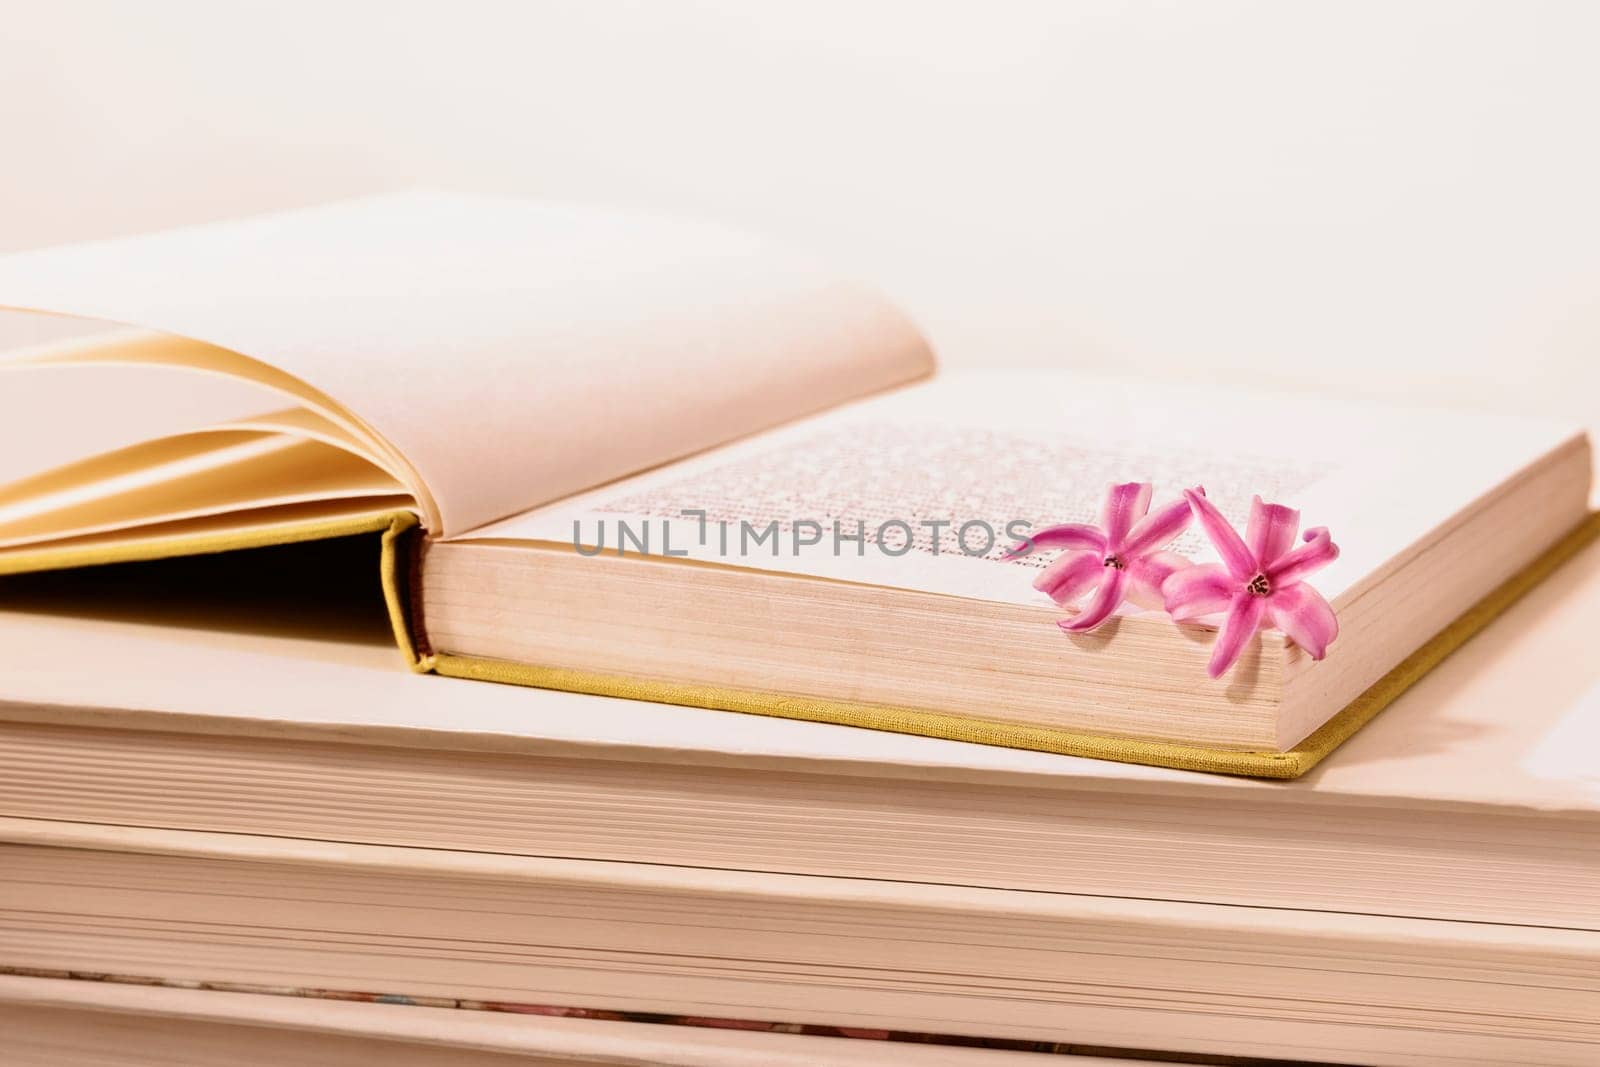  Small pink flowers of common hyacinth on opened  book  , creative and romantic  occupation